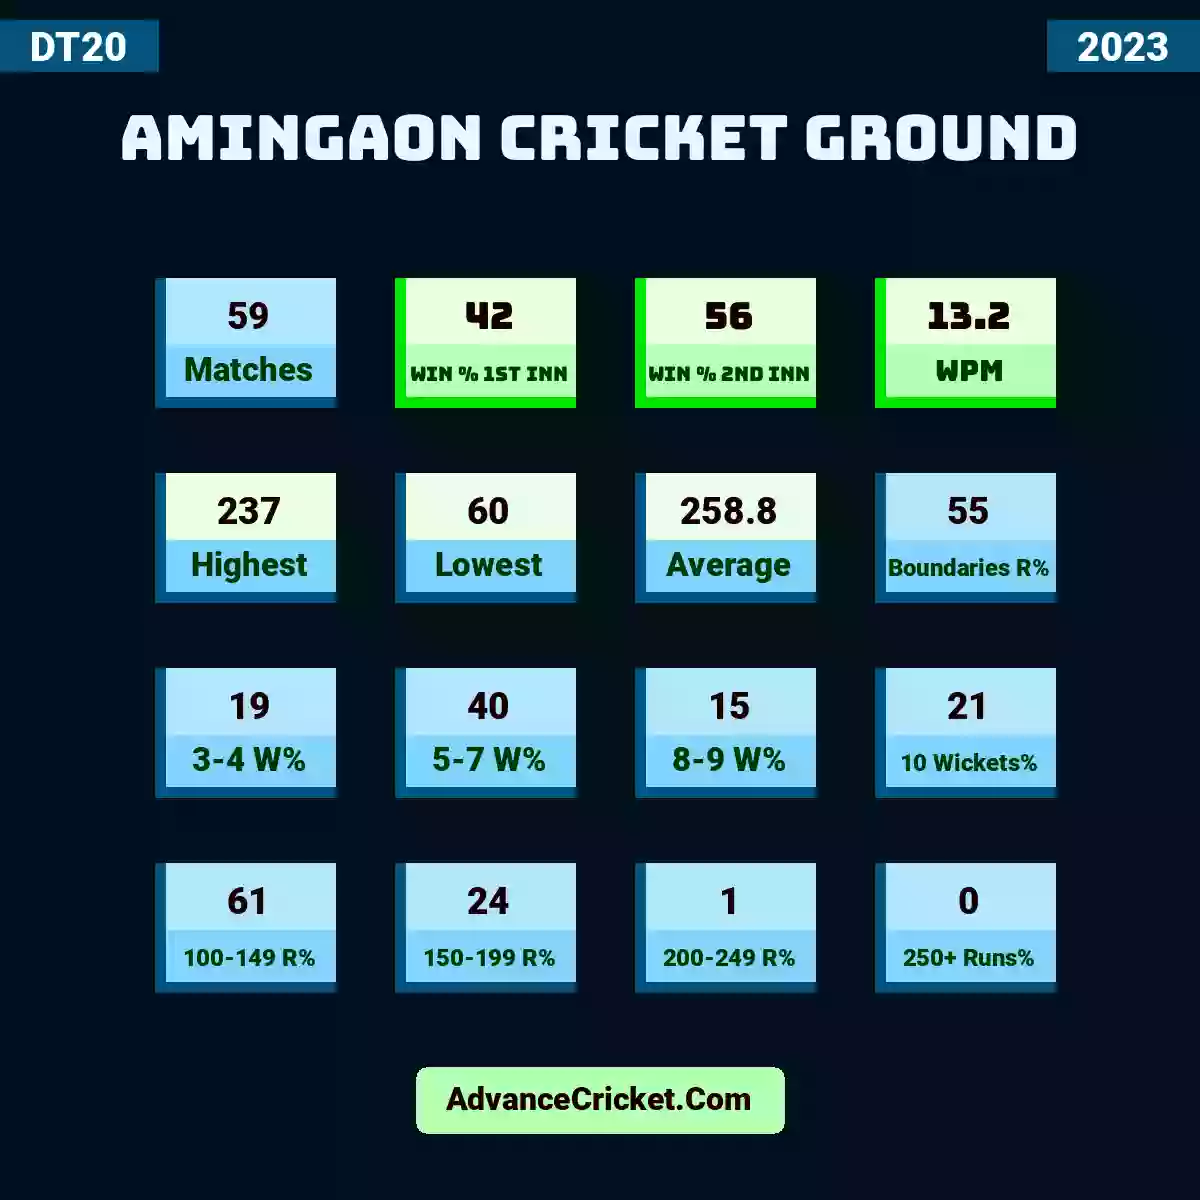 Image showing Amingaon Cricket Ground with Matches: 59, Win % 1st Inn: 42, Win % 2nd Inn: 56, WPM: 13.2, Highest: 237, Lowest: 60, Average: 258.8, Boundaries R%: 55, 3-4 W%: 19, 5-7 W%: 40, 8-9 W%: 15, 10 Wickets%: 21, 100-149 R%: 61, 150-199 R%: 24, 200-249 R%: 1, 250+ Runs%: 0.